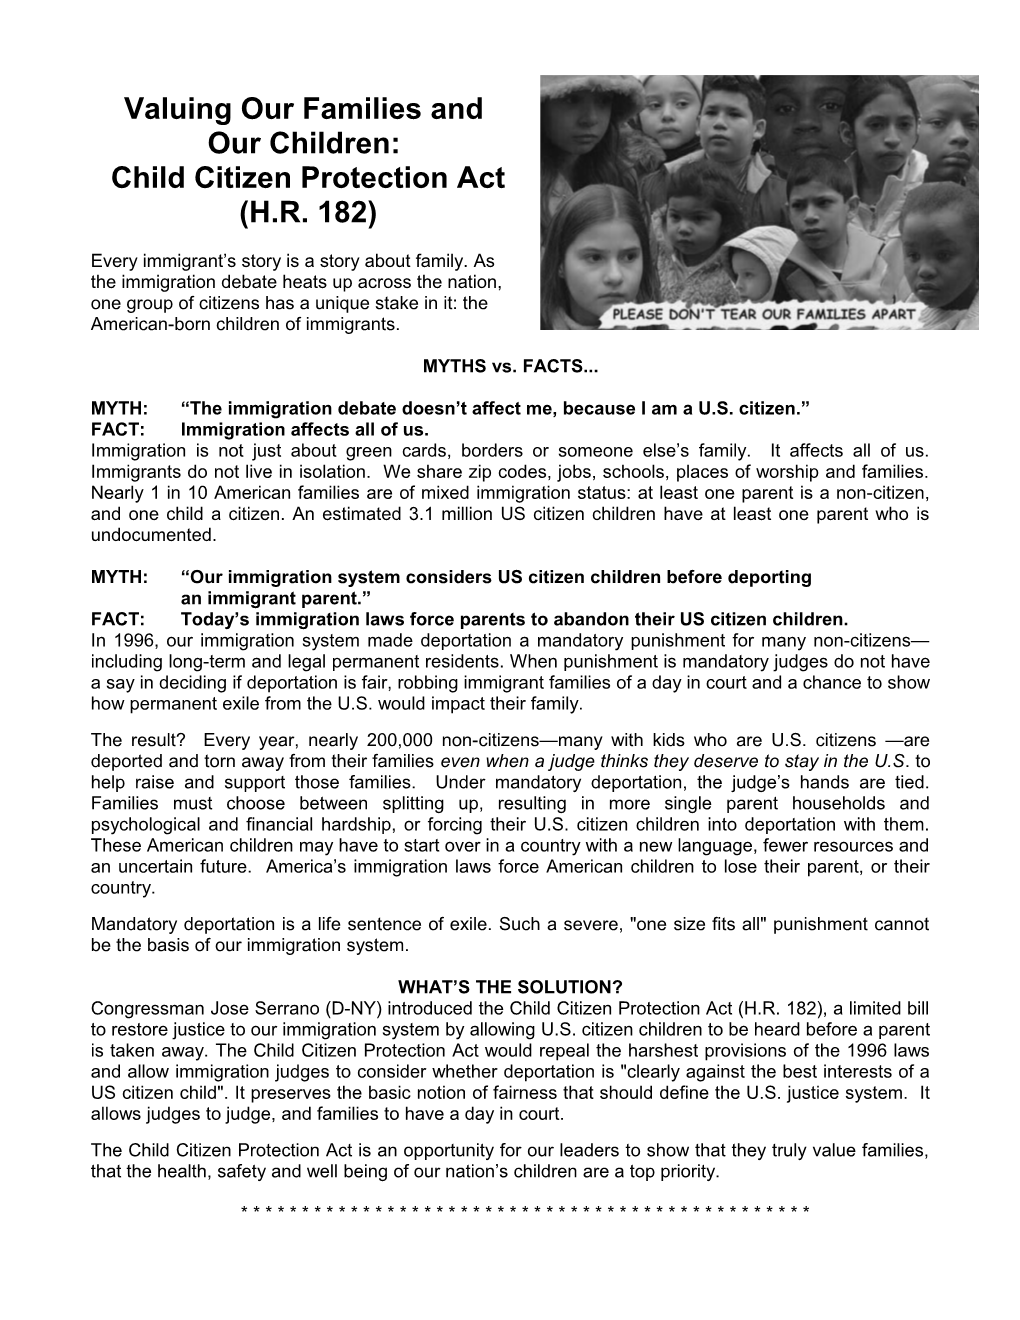 Valuing Our Families and Our Children: the Child Citizen Protection Act (HR 213)